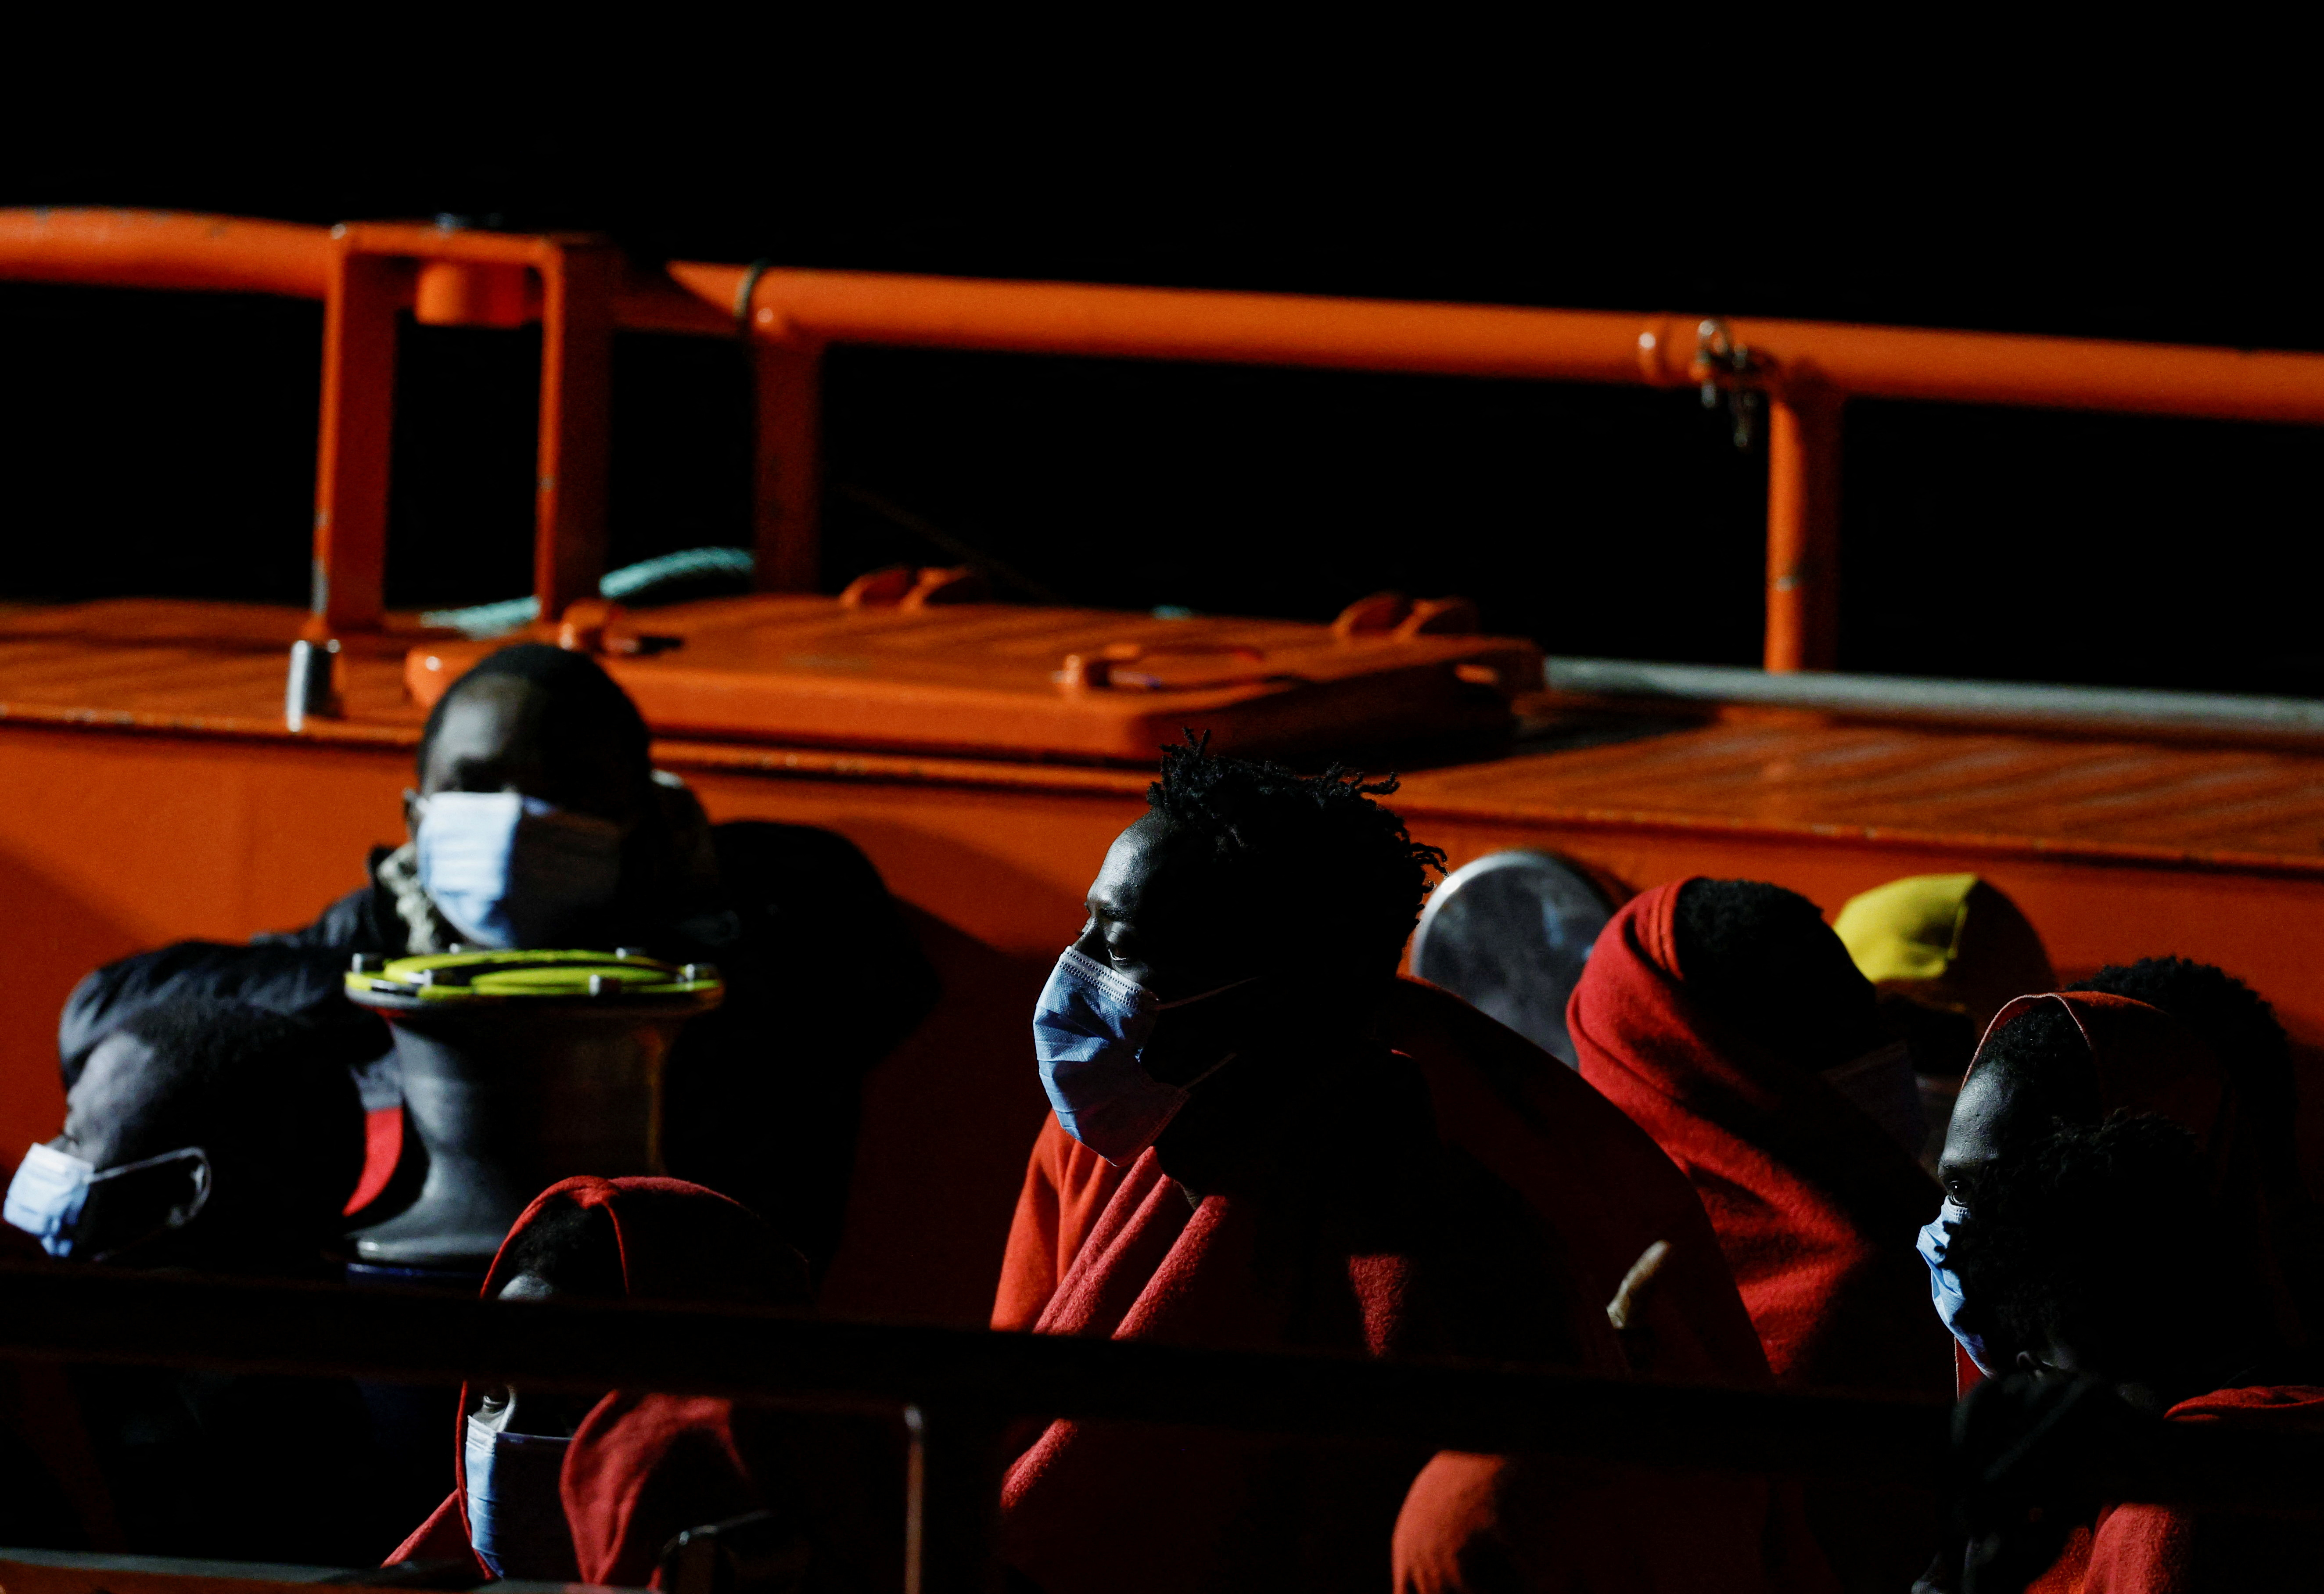 Migrants wait to disembark from a Spanish coast guard vessel, in the port of Arguineguin